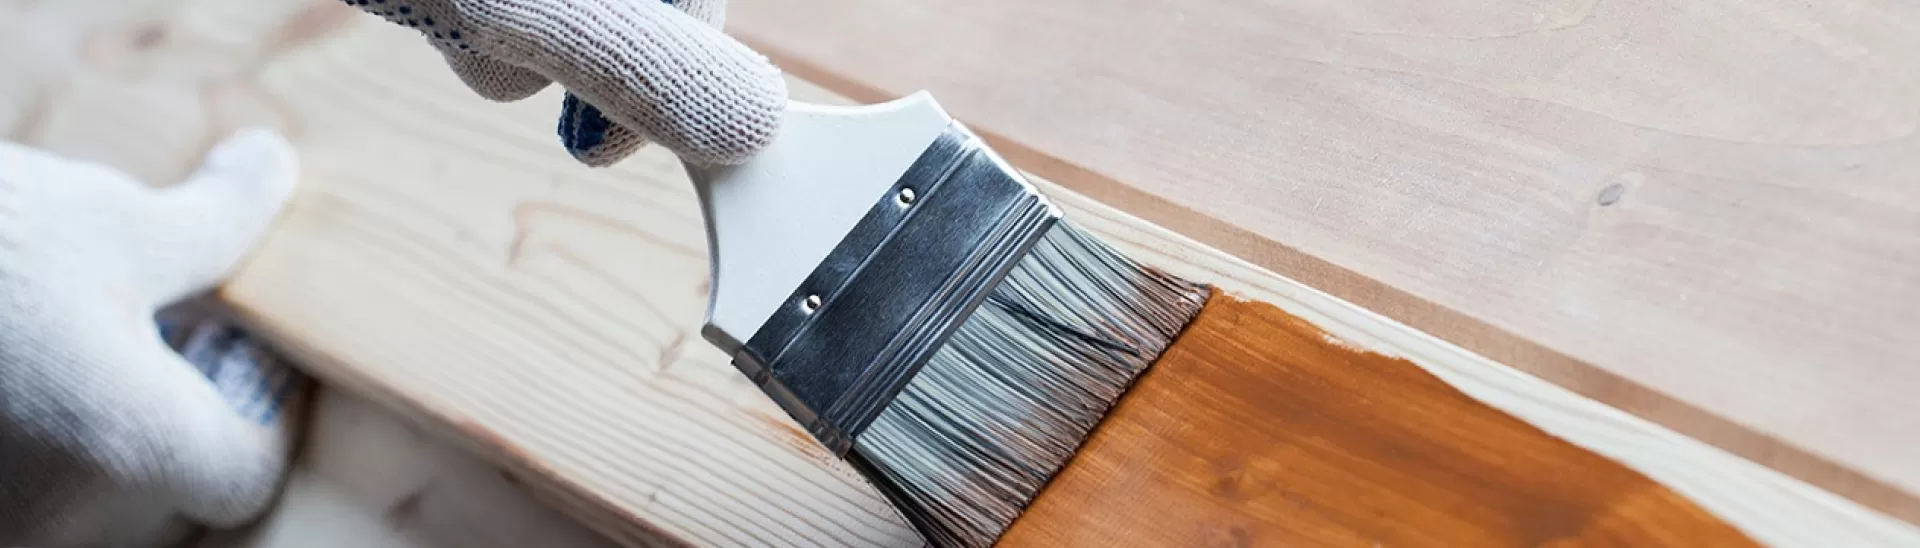 How to Paint Wood & Wooden Furniture Like a Pro at Home?